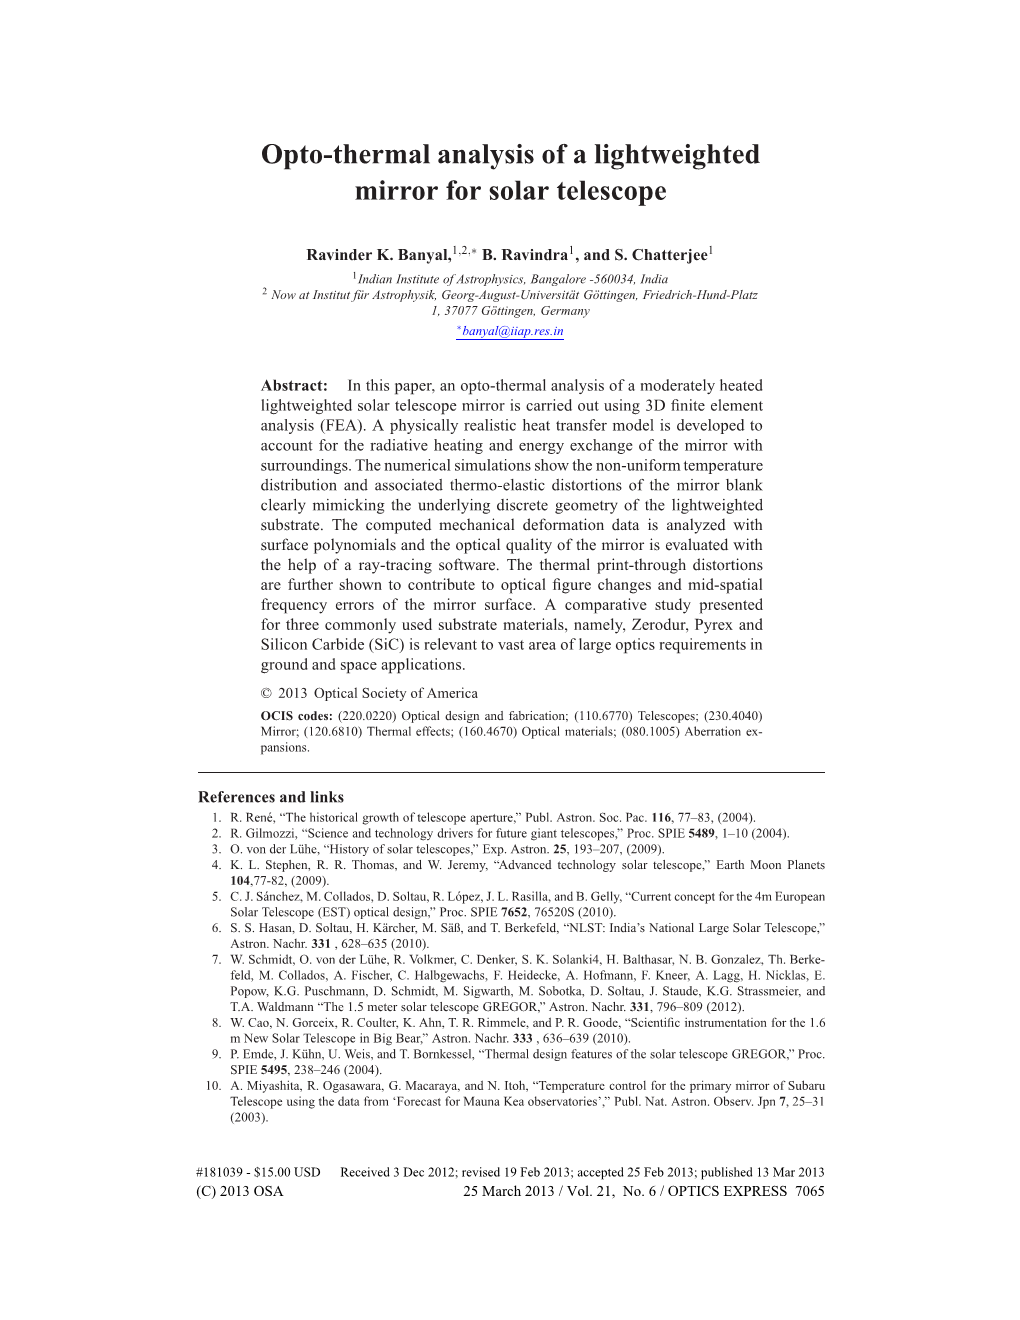 Opto-Thermal Analysis of a Lightweighted Mirror for Solar Telescope